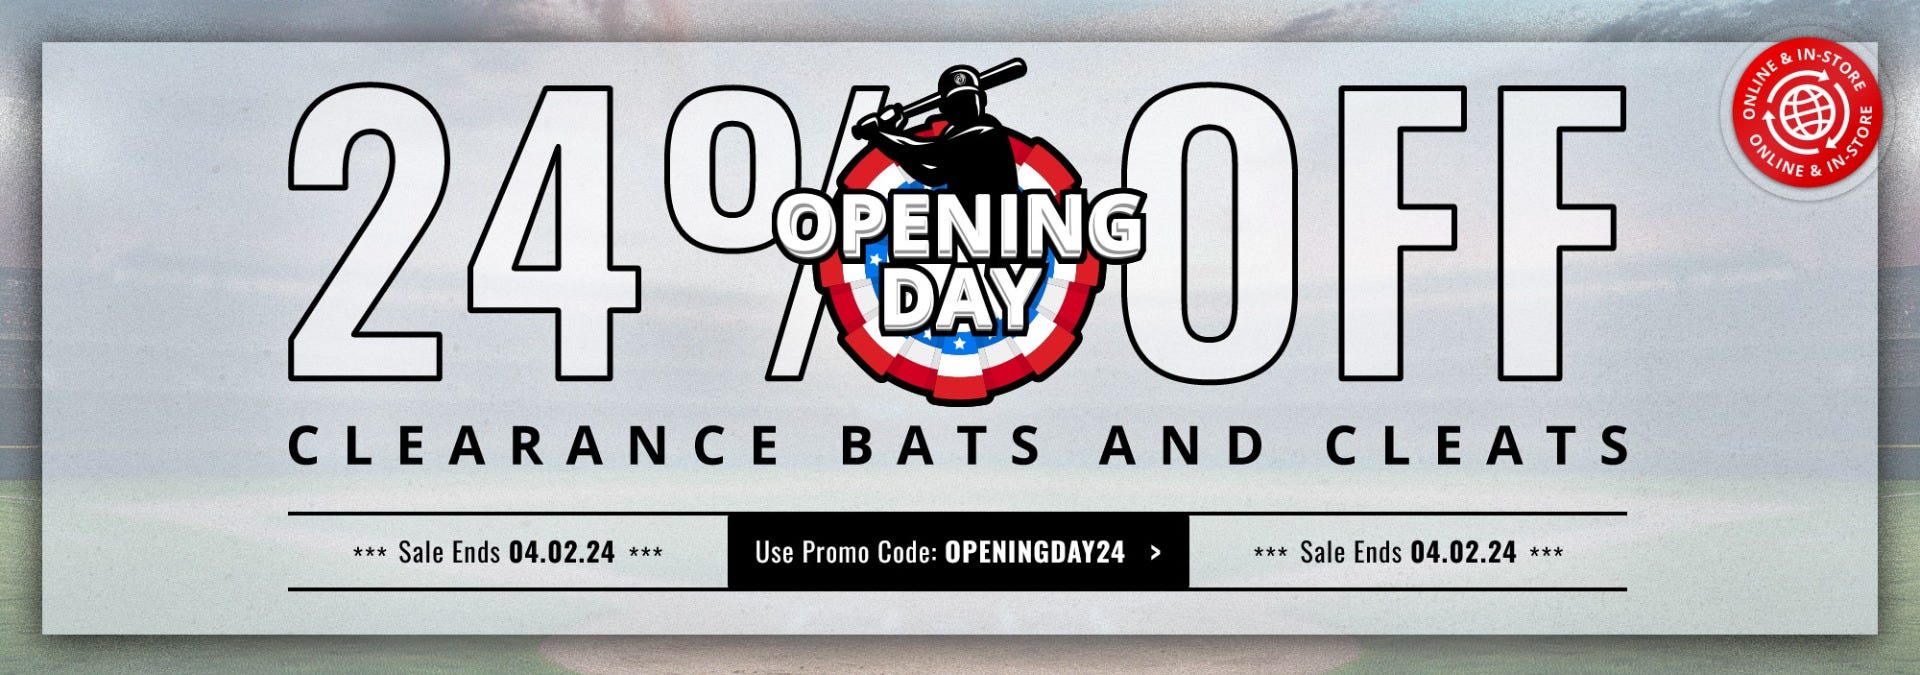 Opening Day Sale: 24% Off Clearance Bats & Cleats